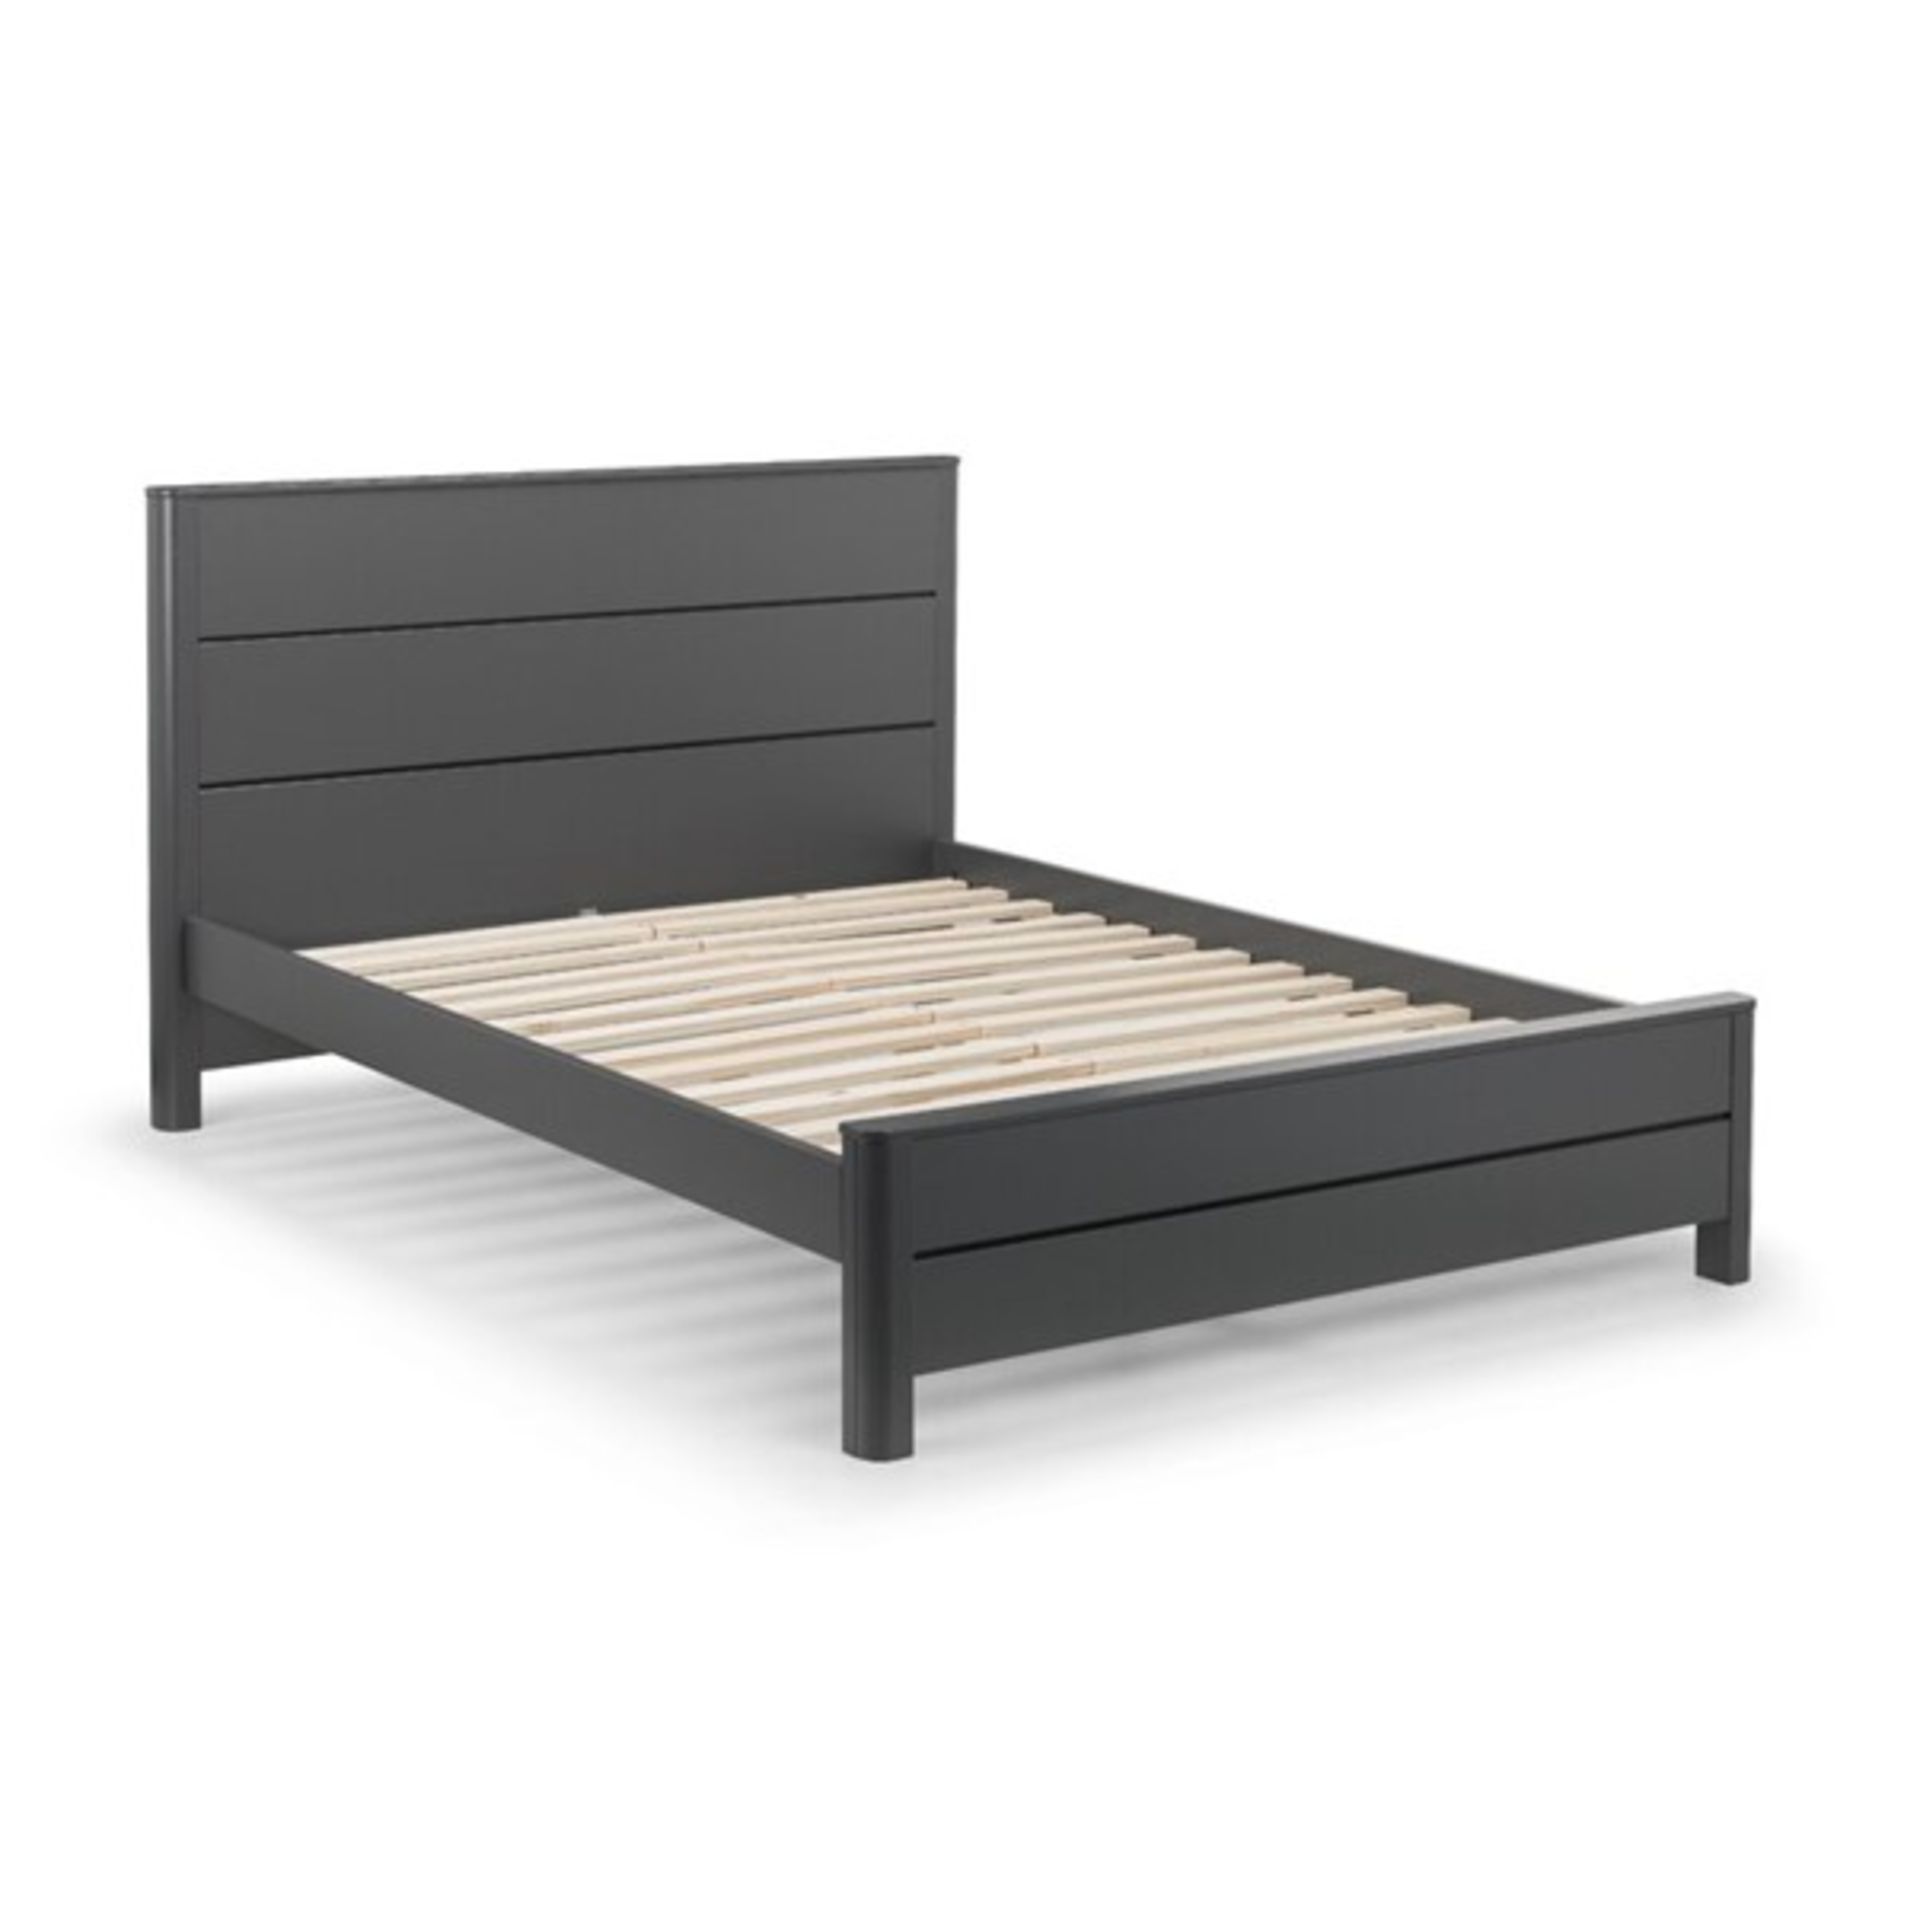 RRP £445.99 - 5FT Kingsize Janine Bed Frame - 165cm W x 214cm L - The bedroom collection has a